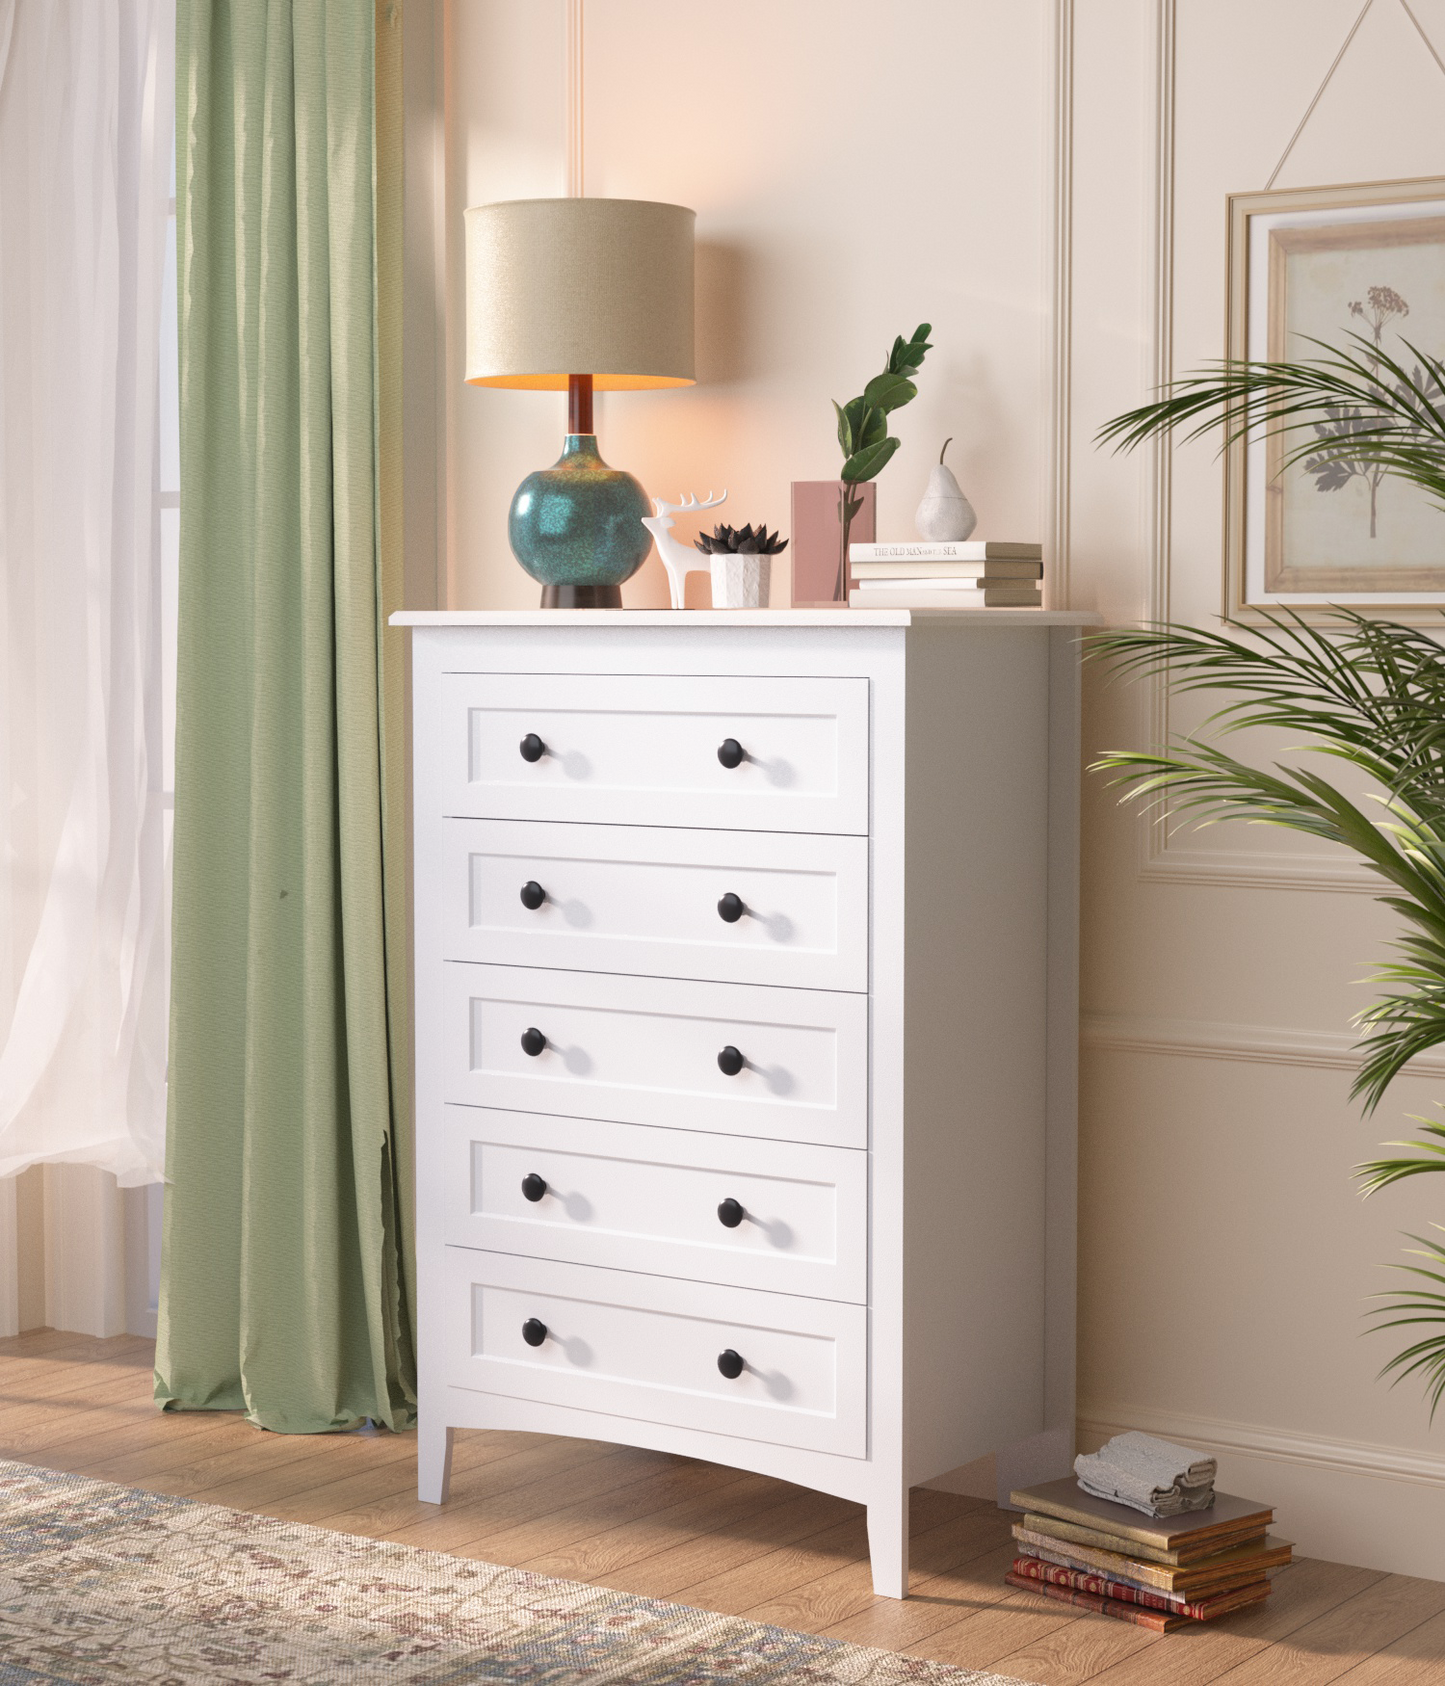 HAIOOU 5 Drawer White Dresser with Power Outlets